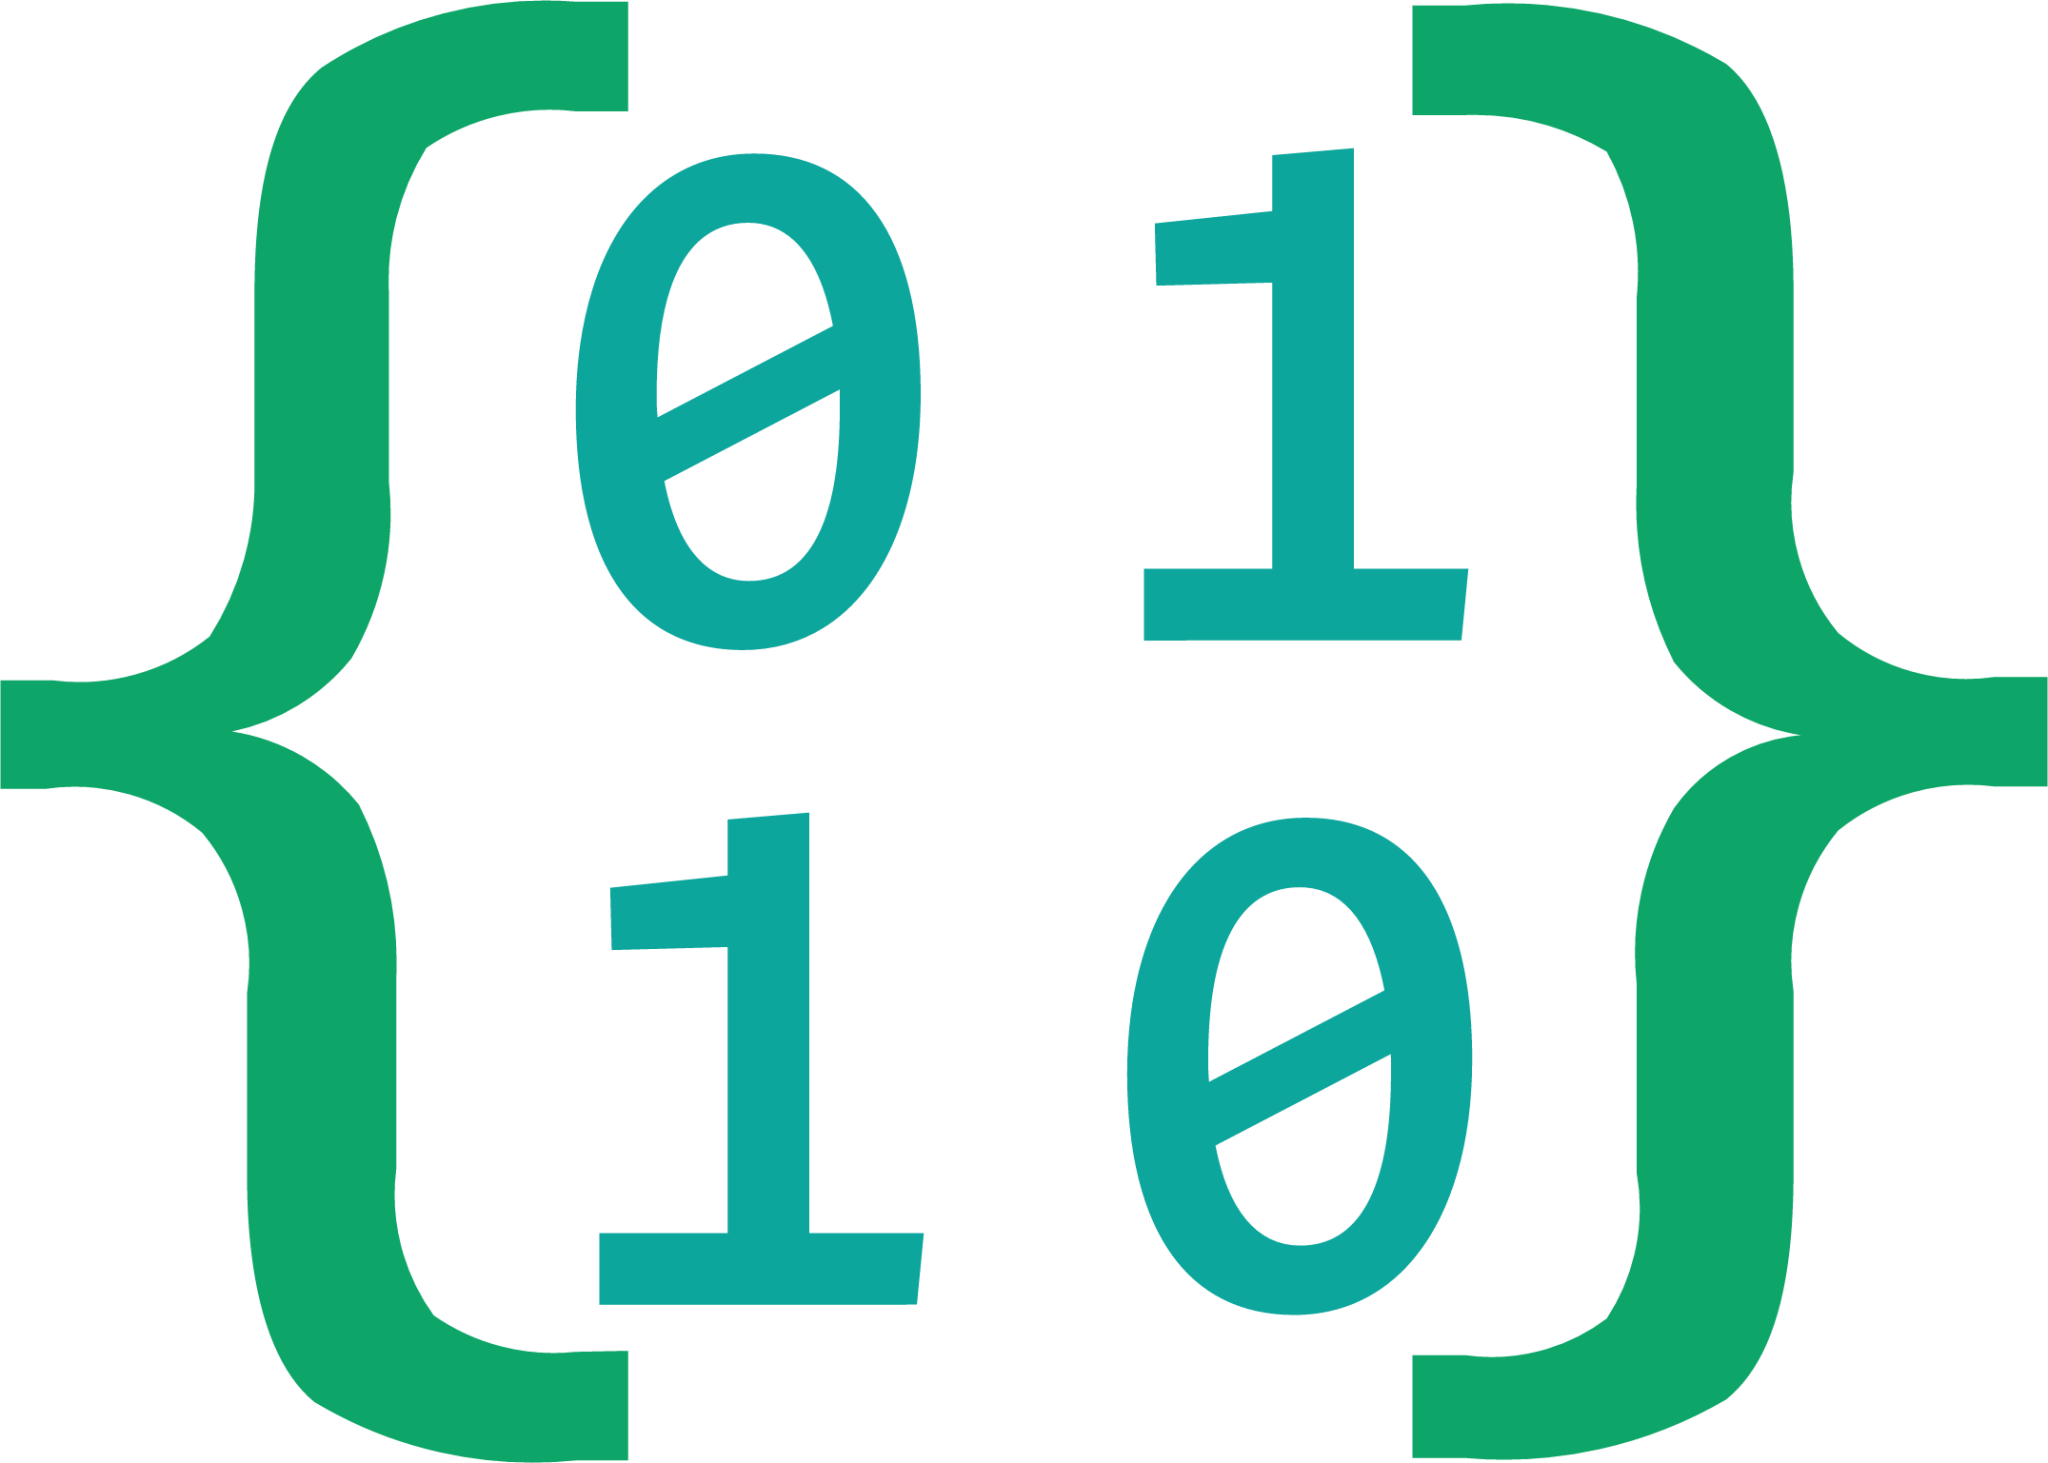 file type cddl icon